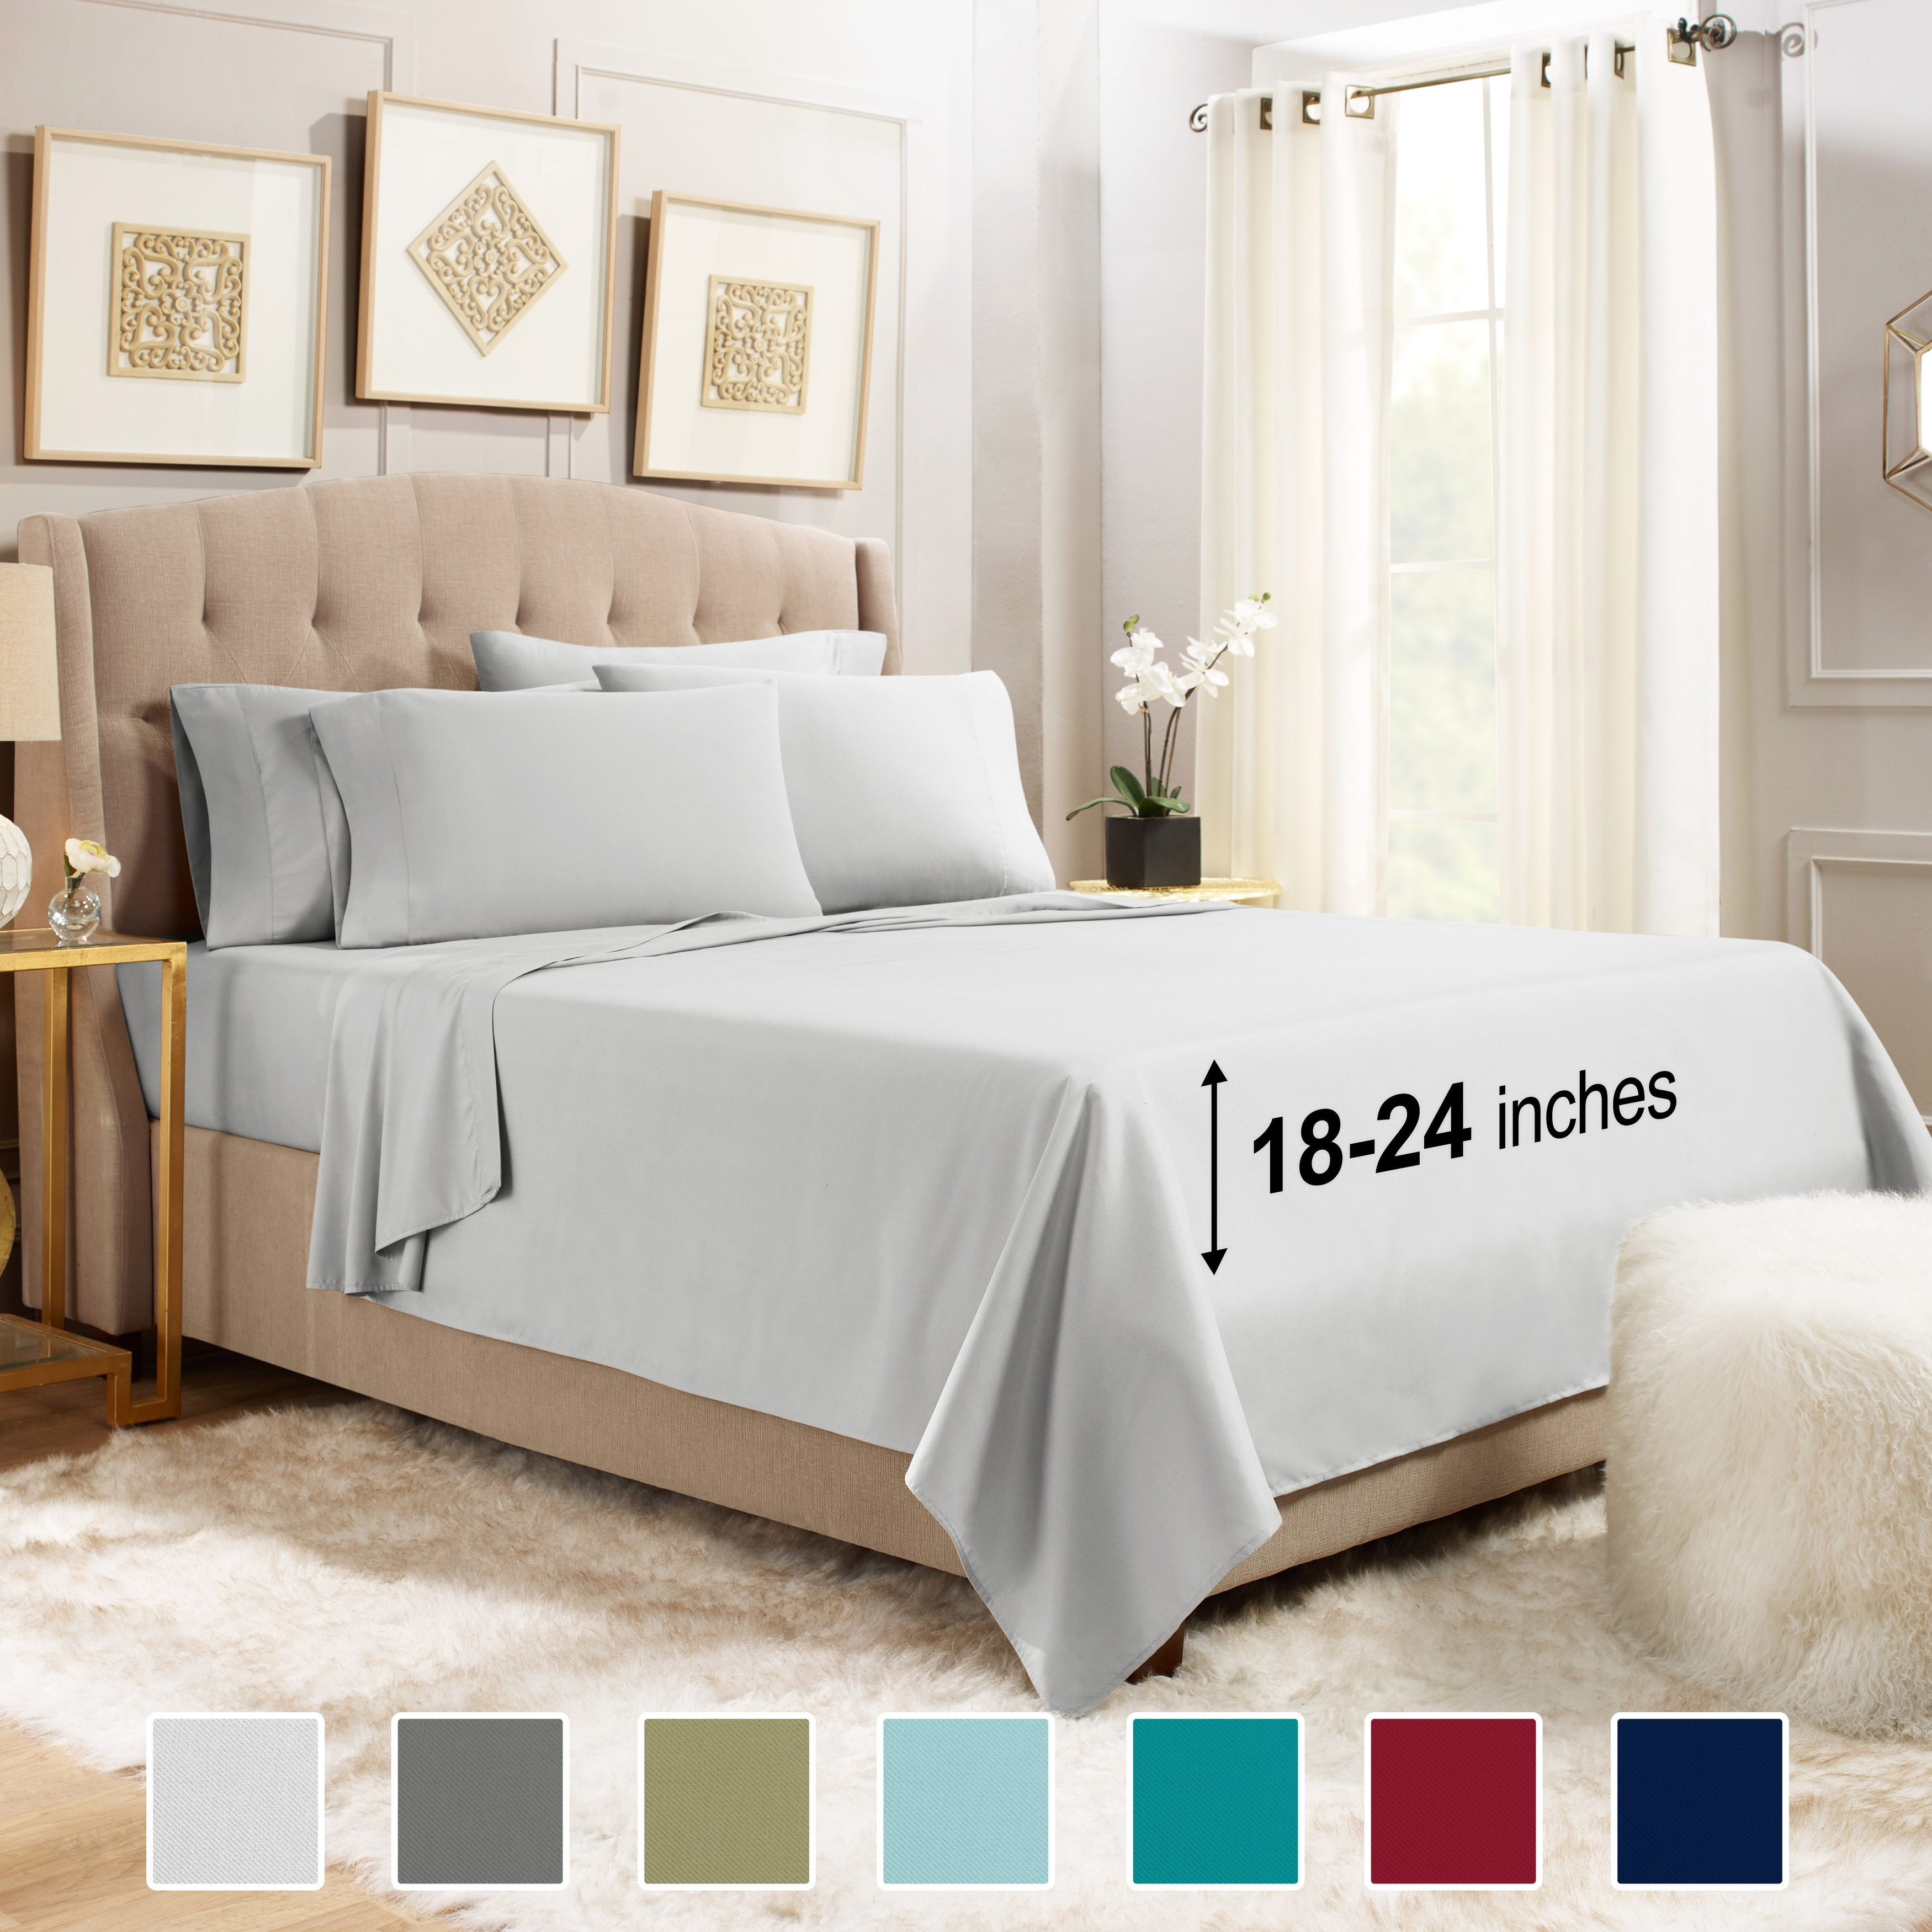 Elegant Comfort Luxury Soft Bed Sheets Holiday Pattern 1500 Thread Count Percale Egyptian Quality Softness Wrinkle and Fade Resistant (6-Piece)